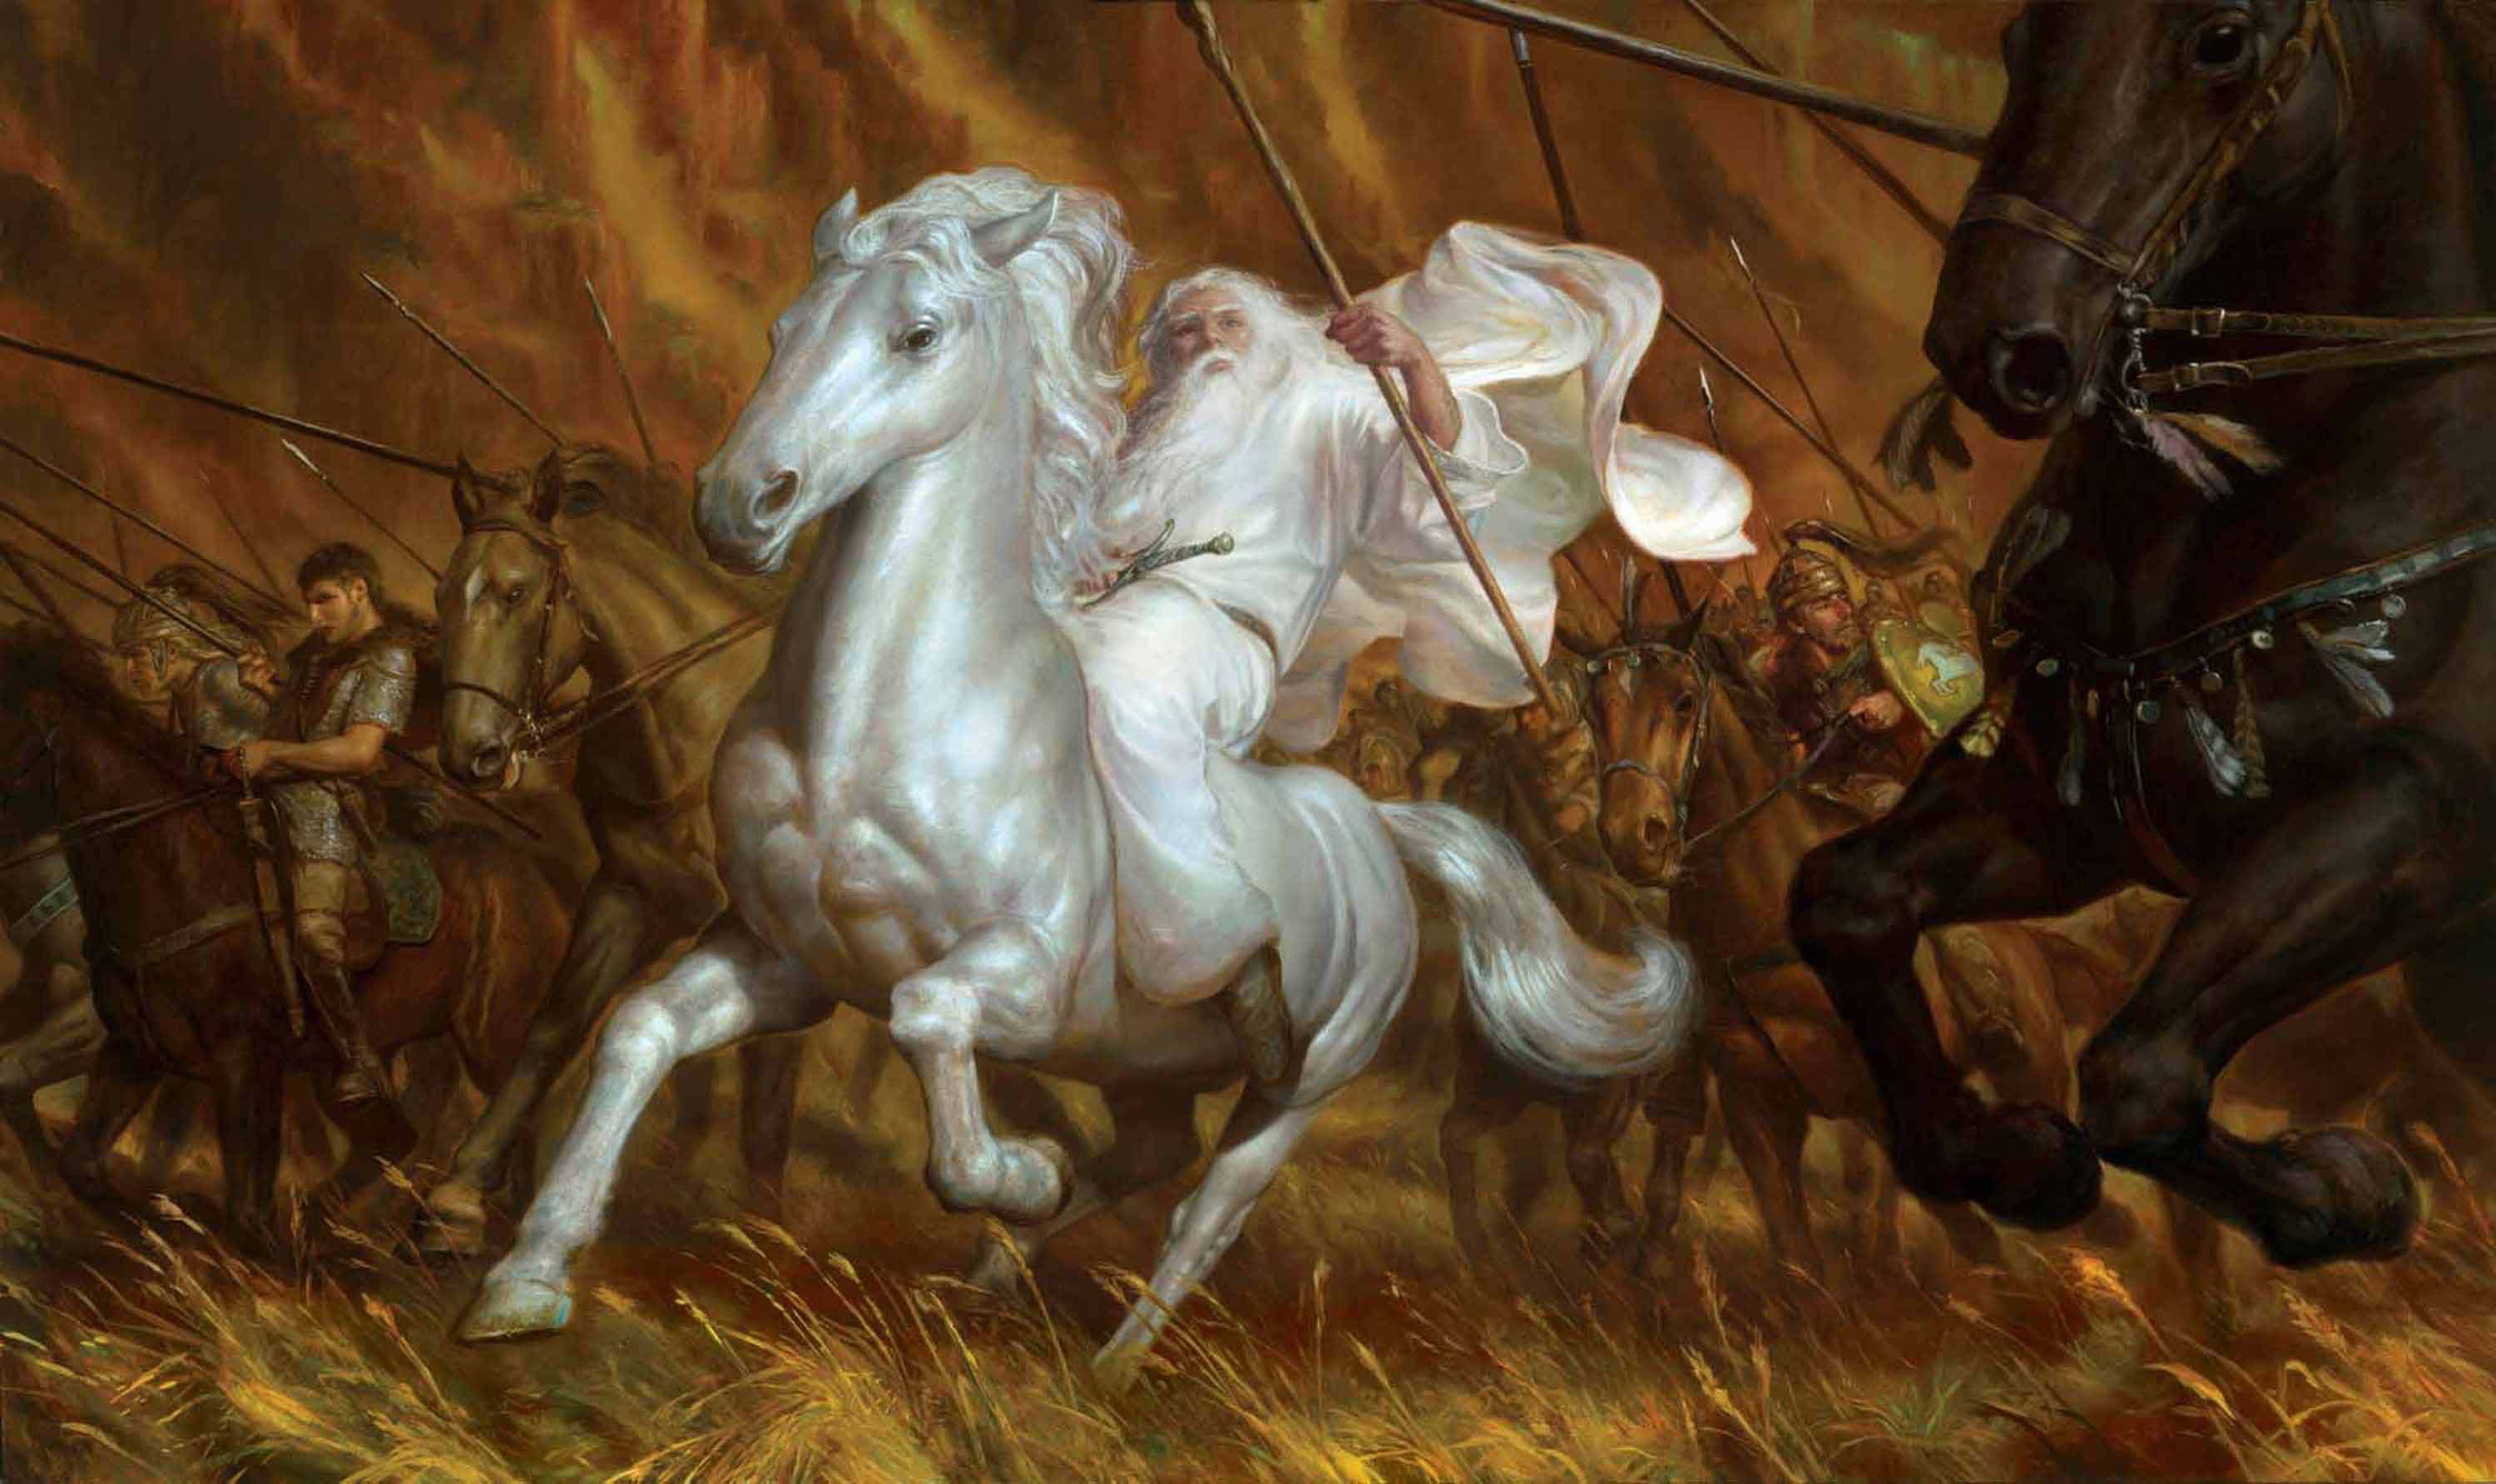 The White Rider
38" x 60"  Oil on Panel  2009
onward to Helm's Deep!
private collection